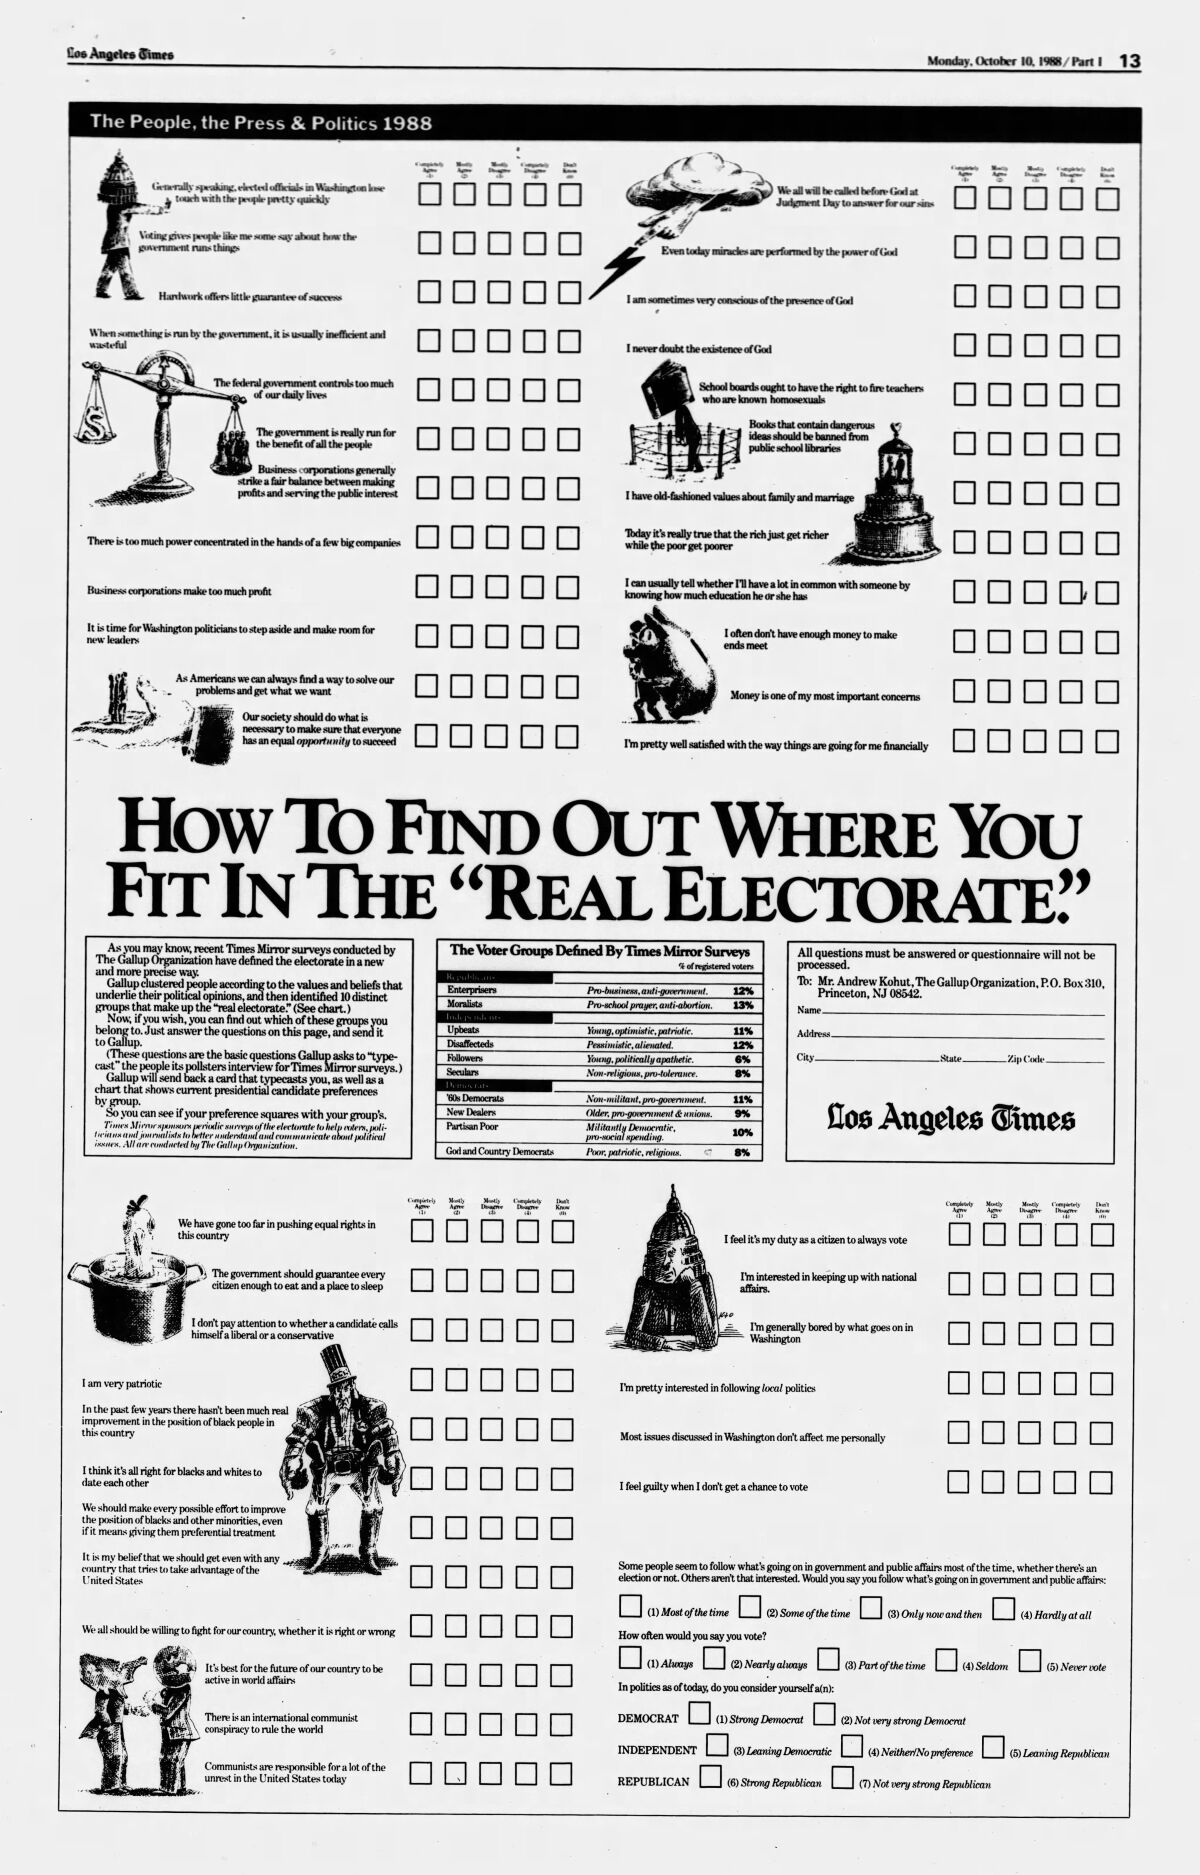 Los Angeles Times advertisement printing the first Typology quiz in 1988